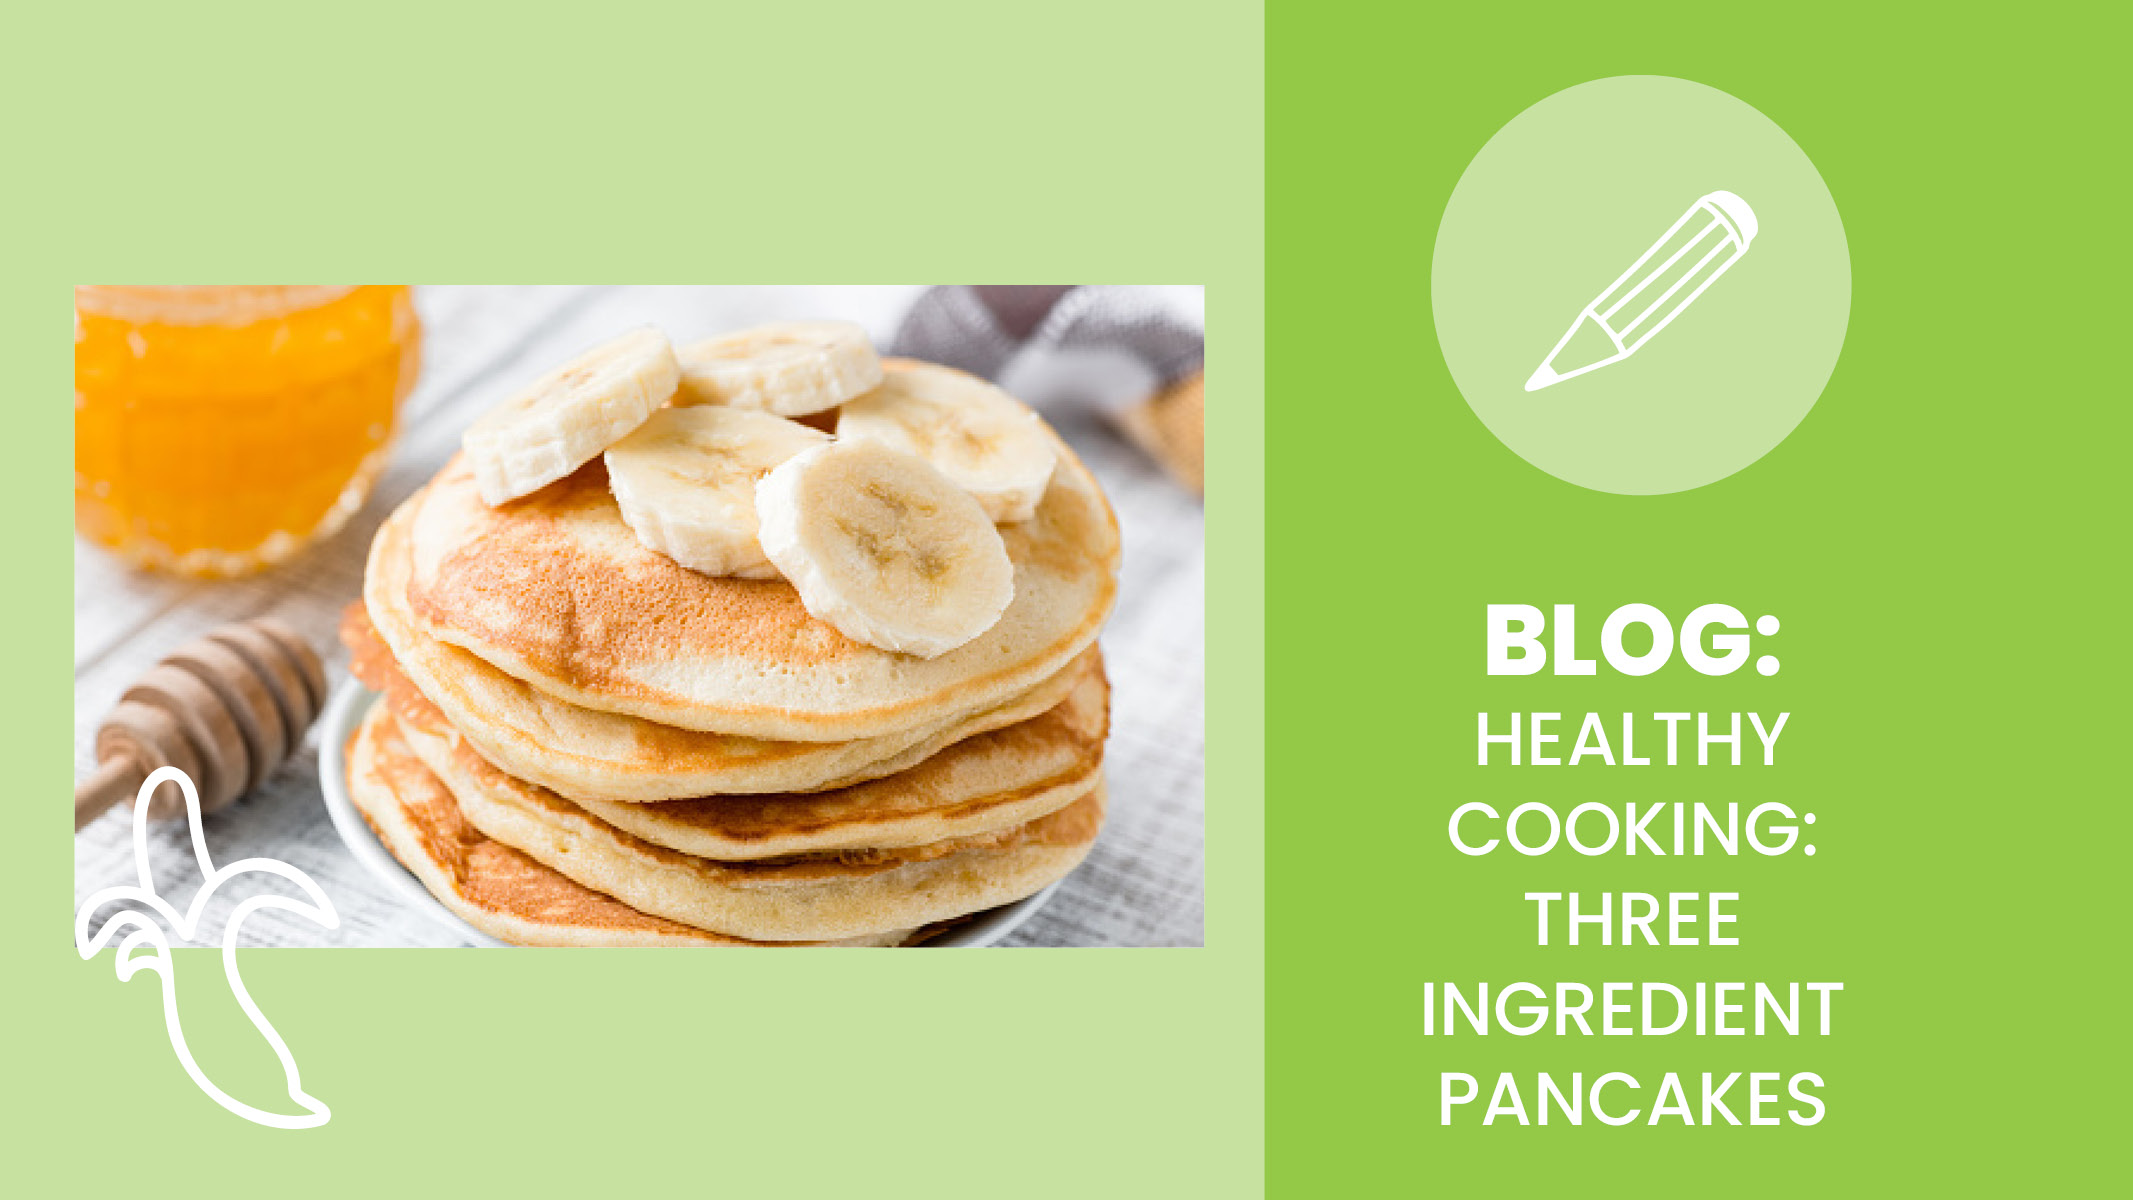 Healthy pancakes made with 3 ingredients for breakfast